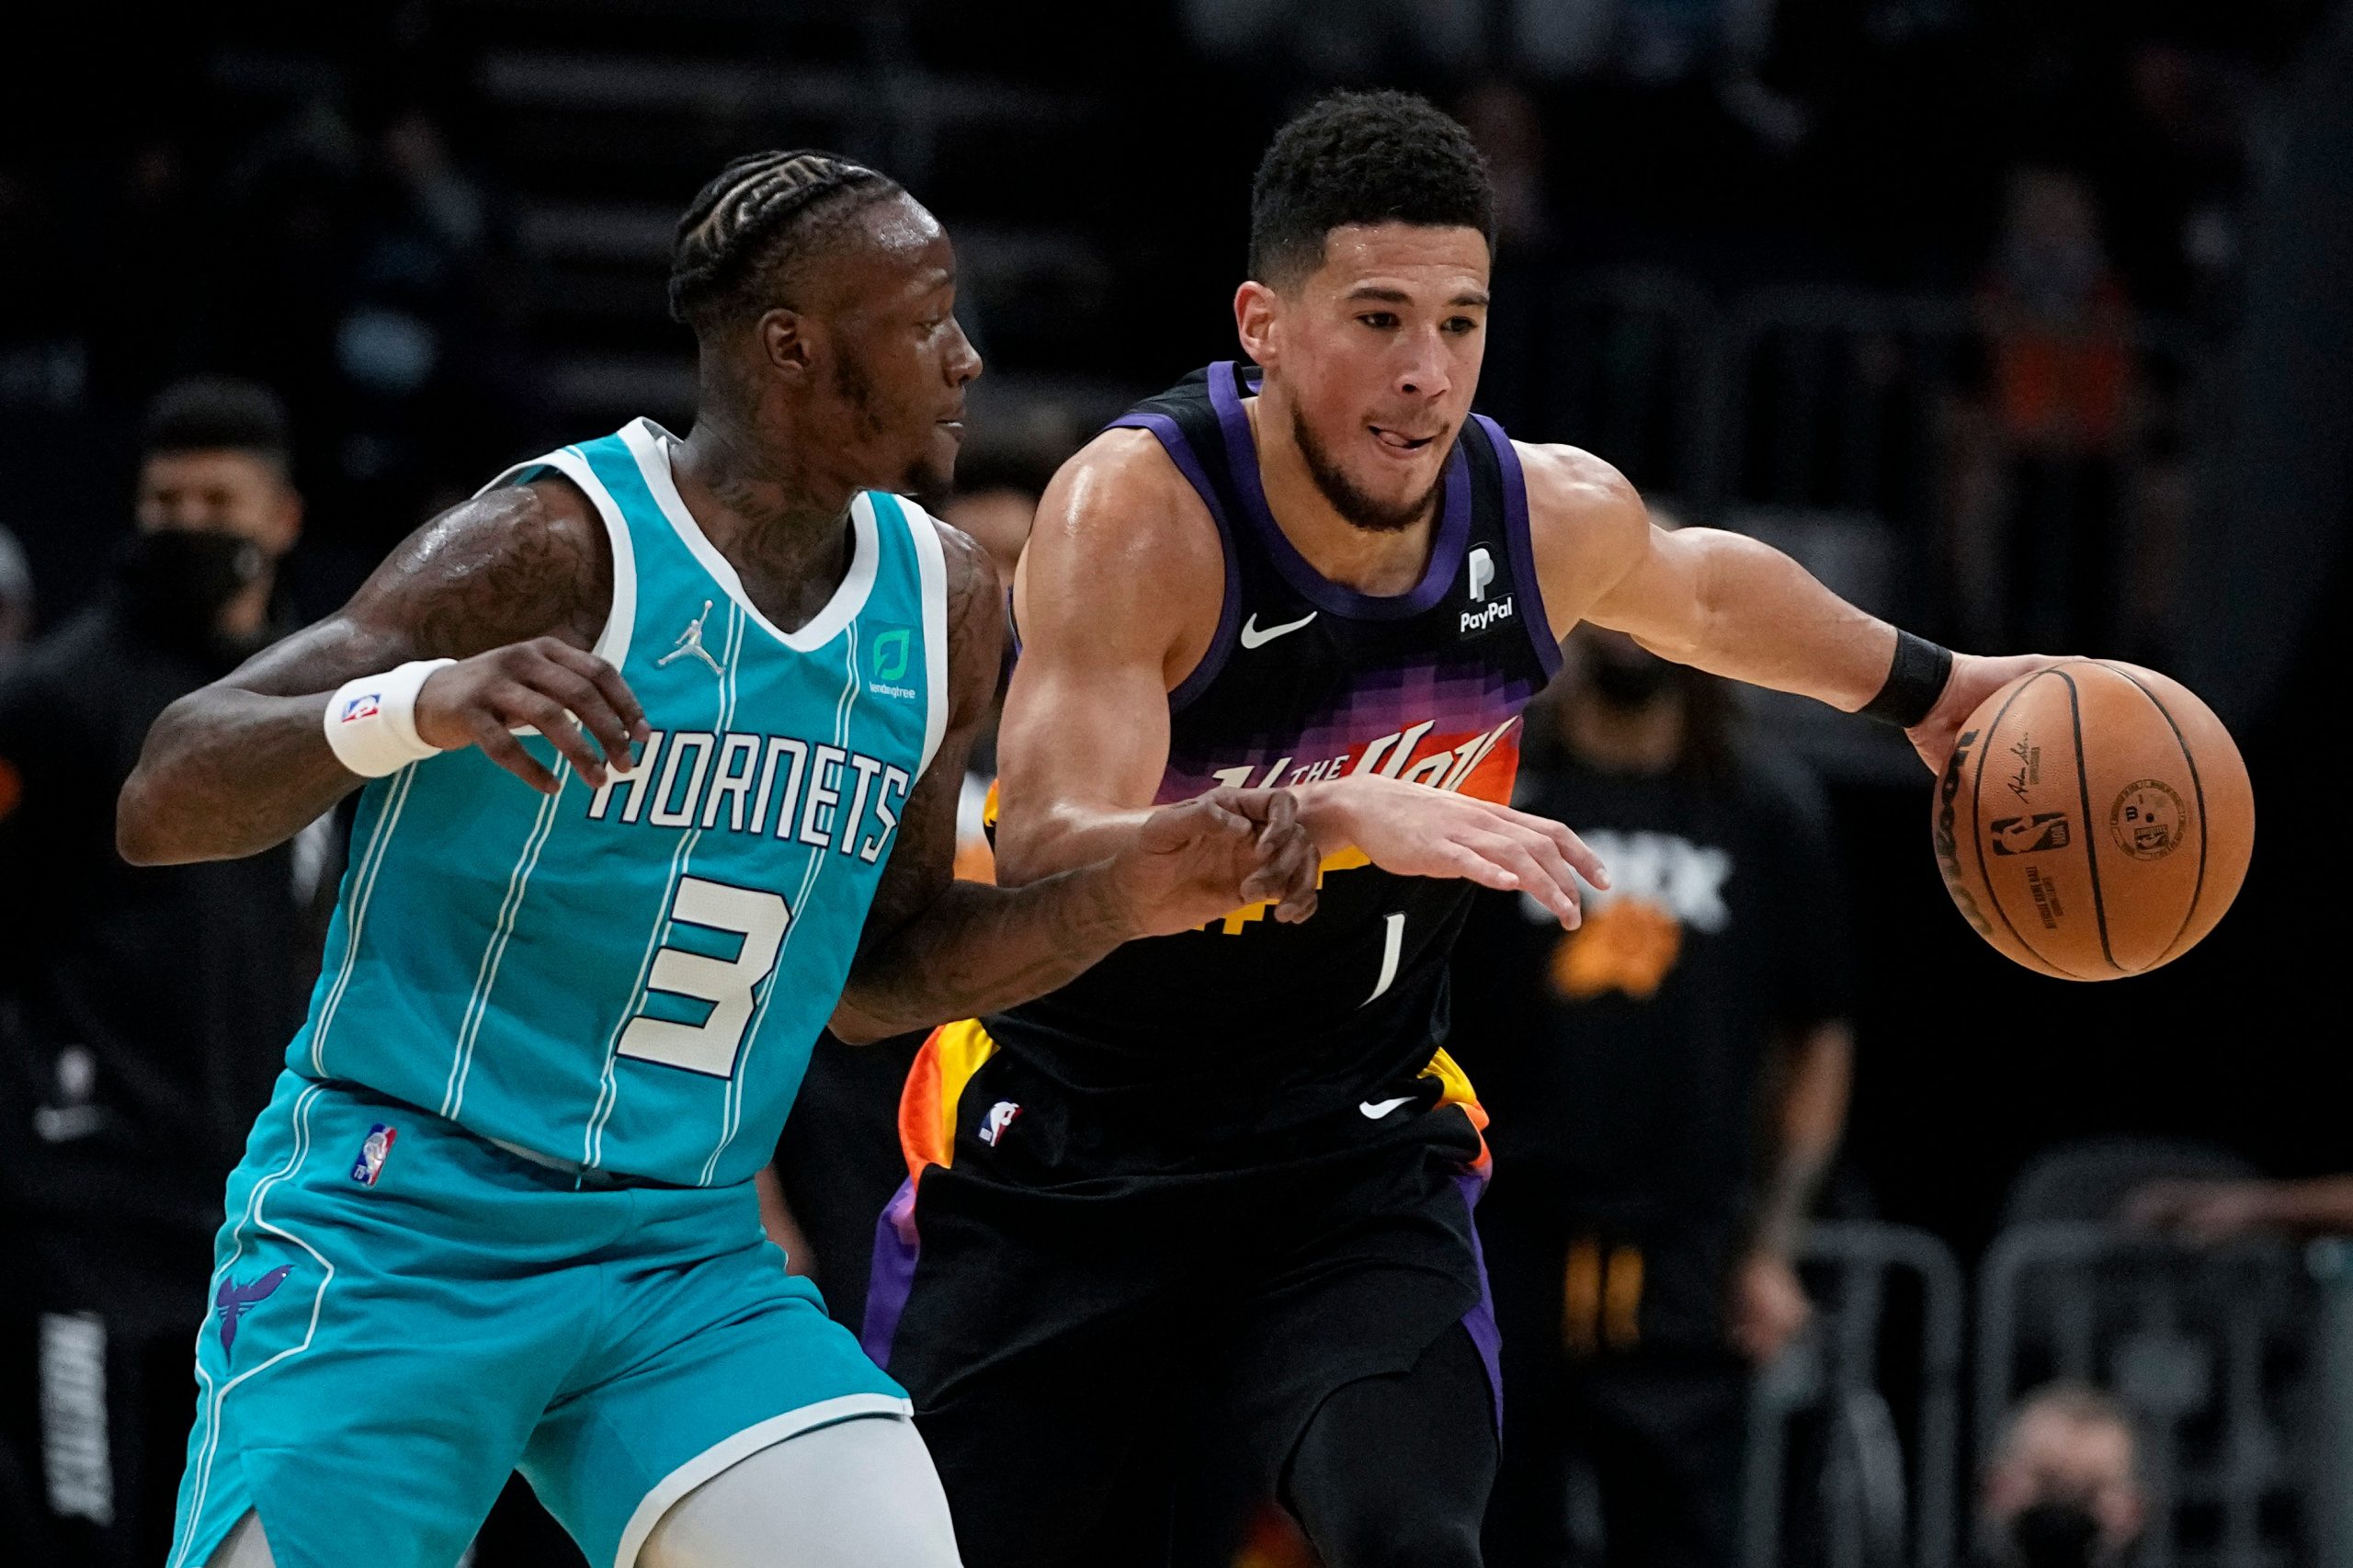 NBA: Booker scores 24 points, depleted Suns rout Hornets 133-99